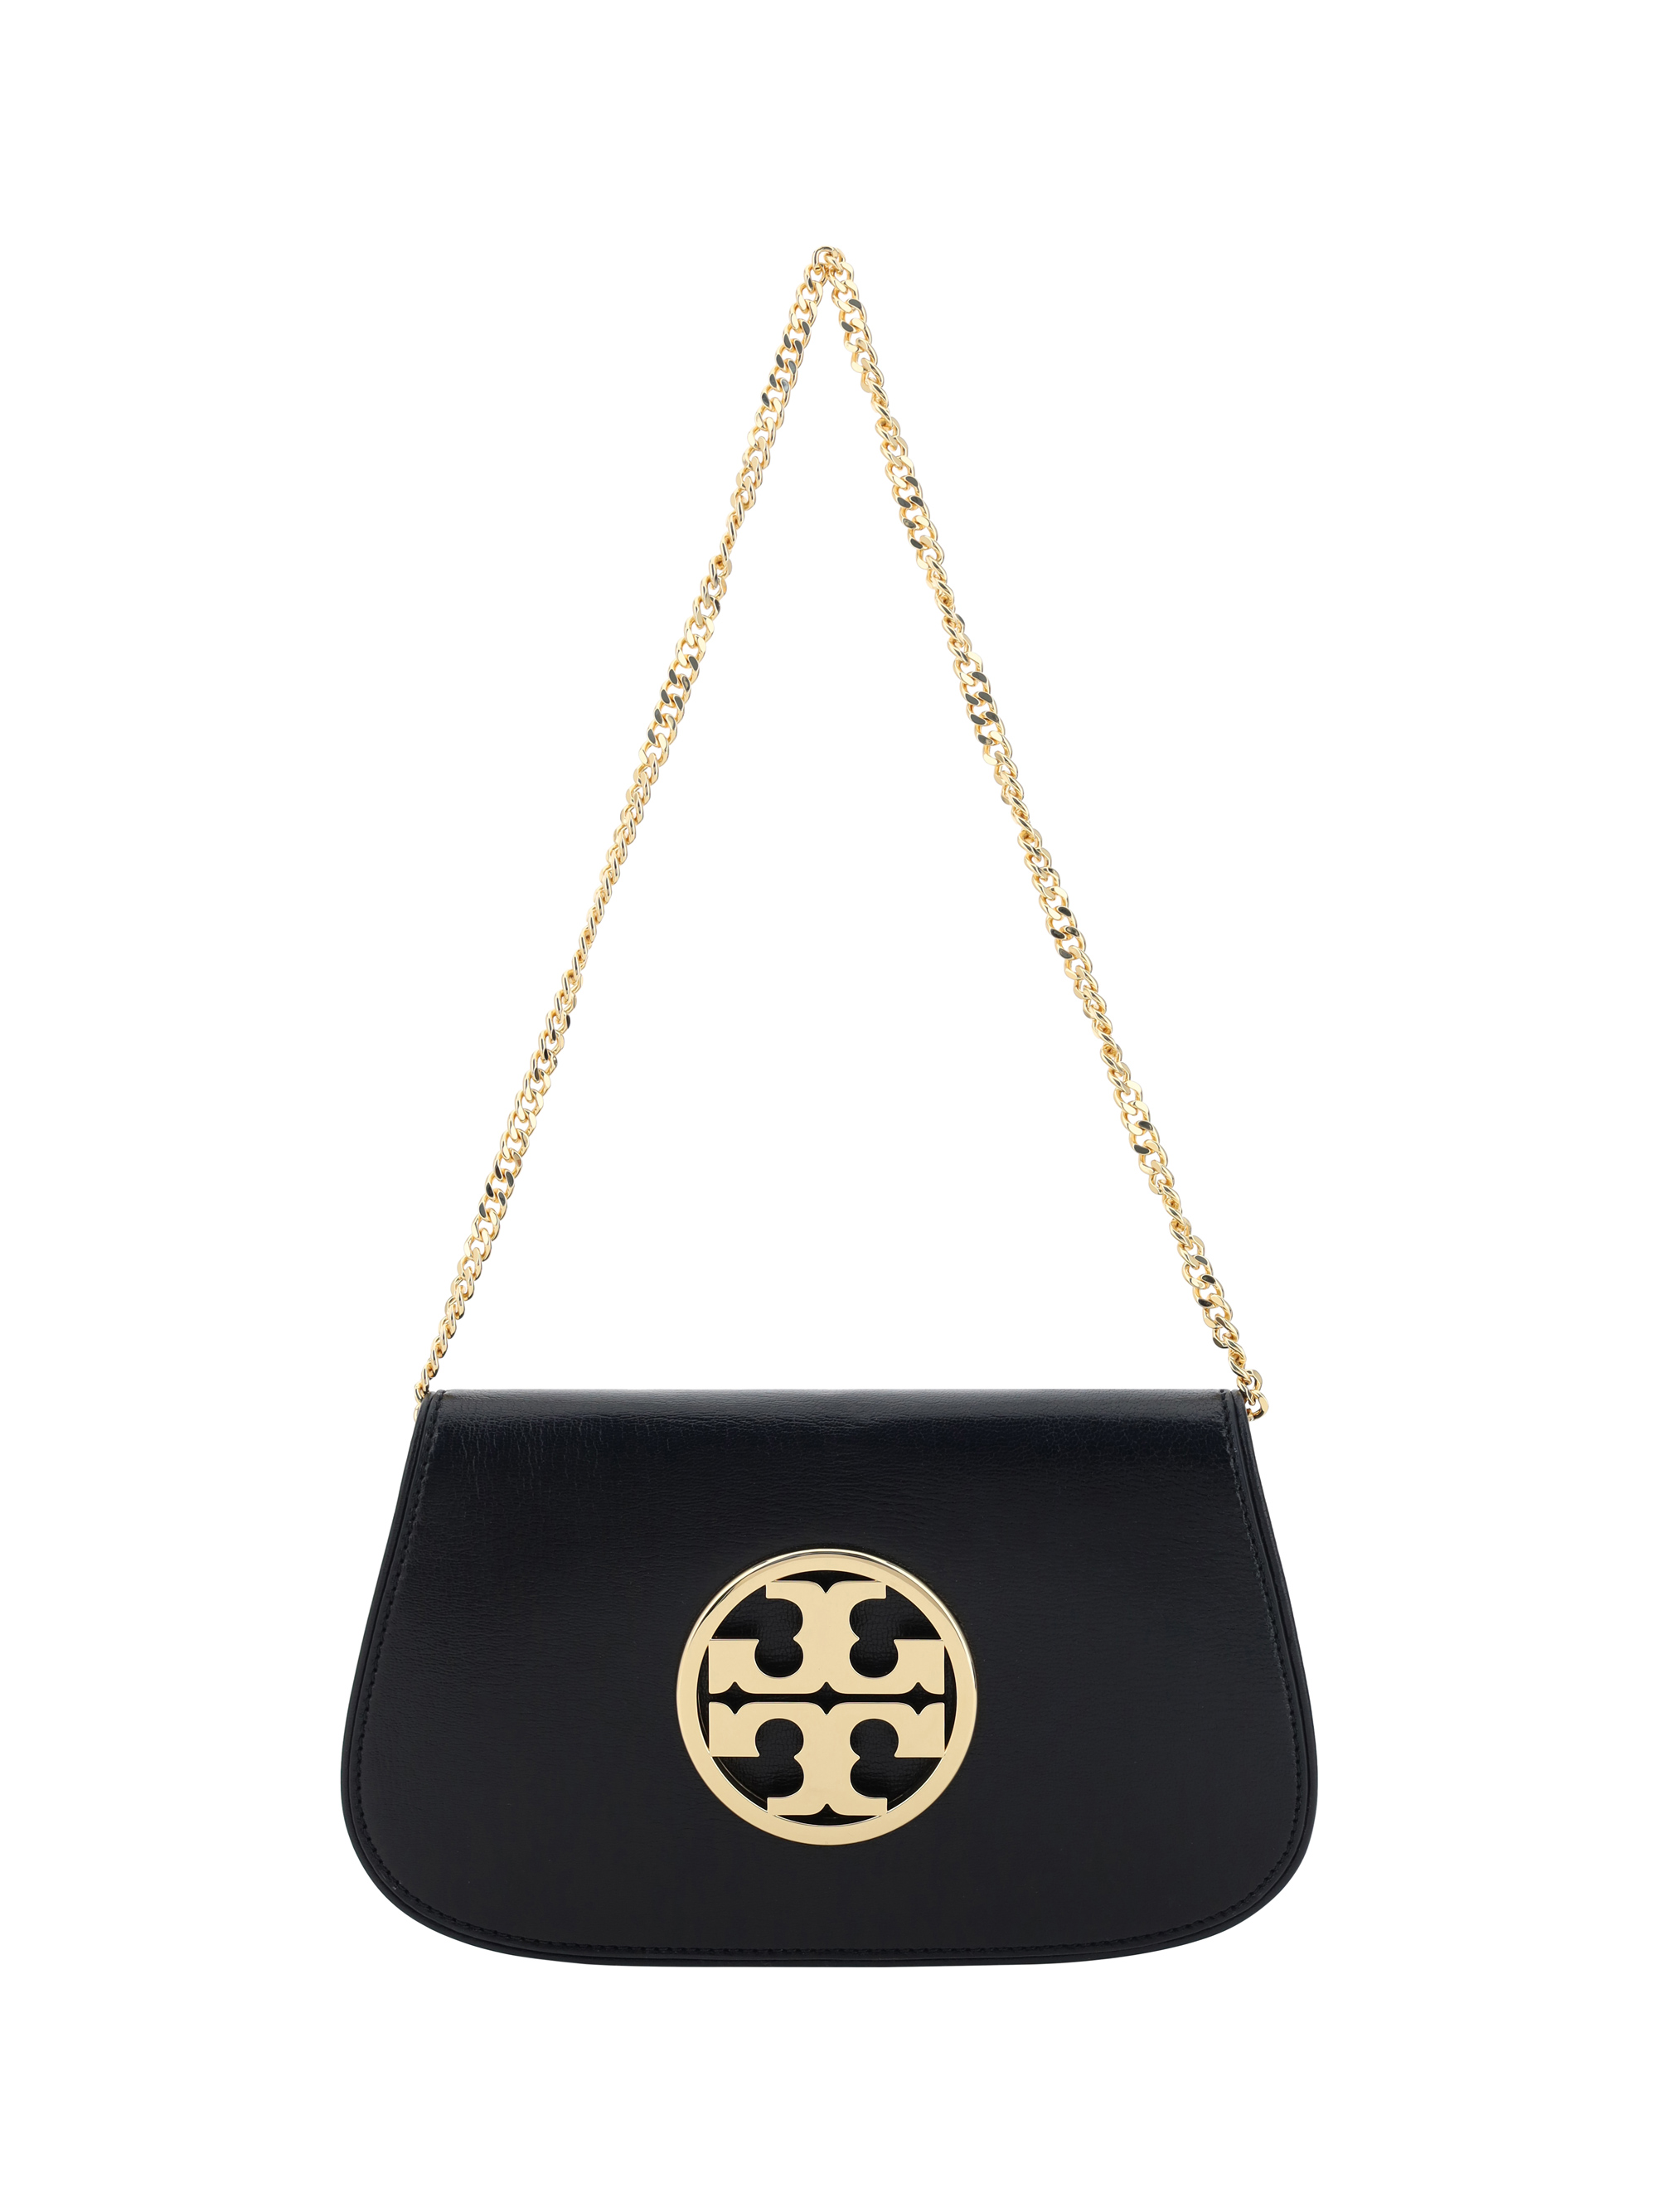 Reva Small Leather Shoulder Bag in Black - Tory Burch